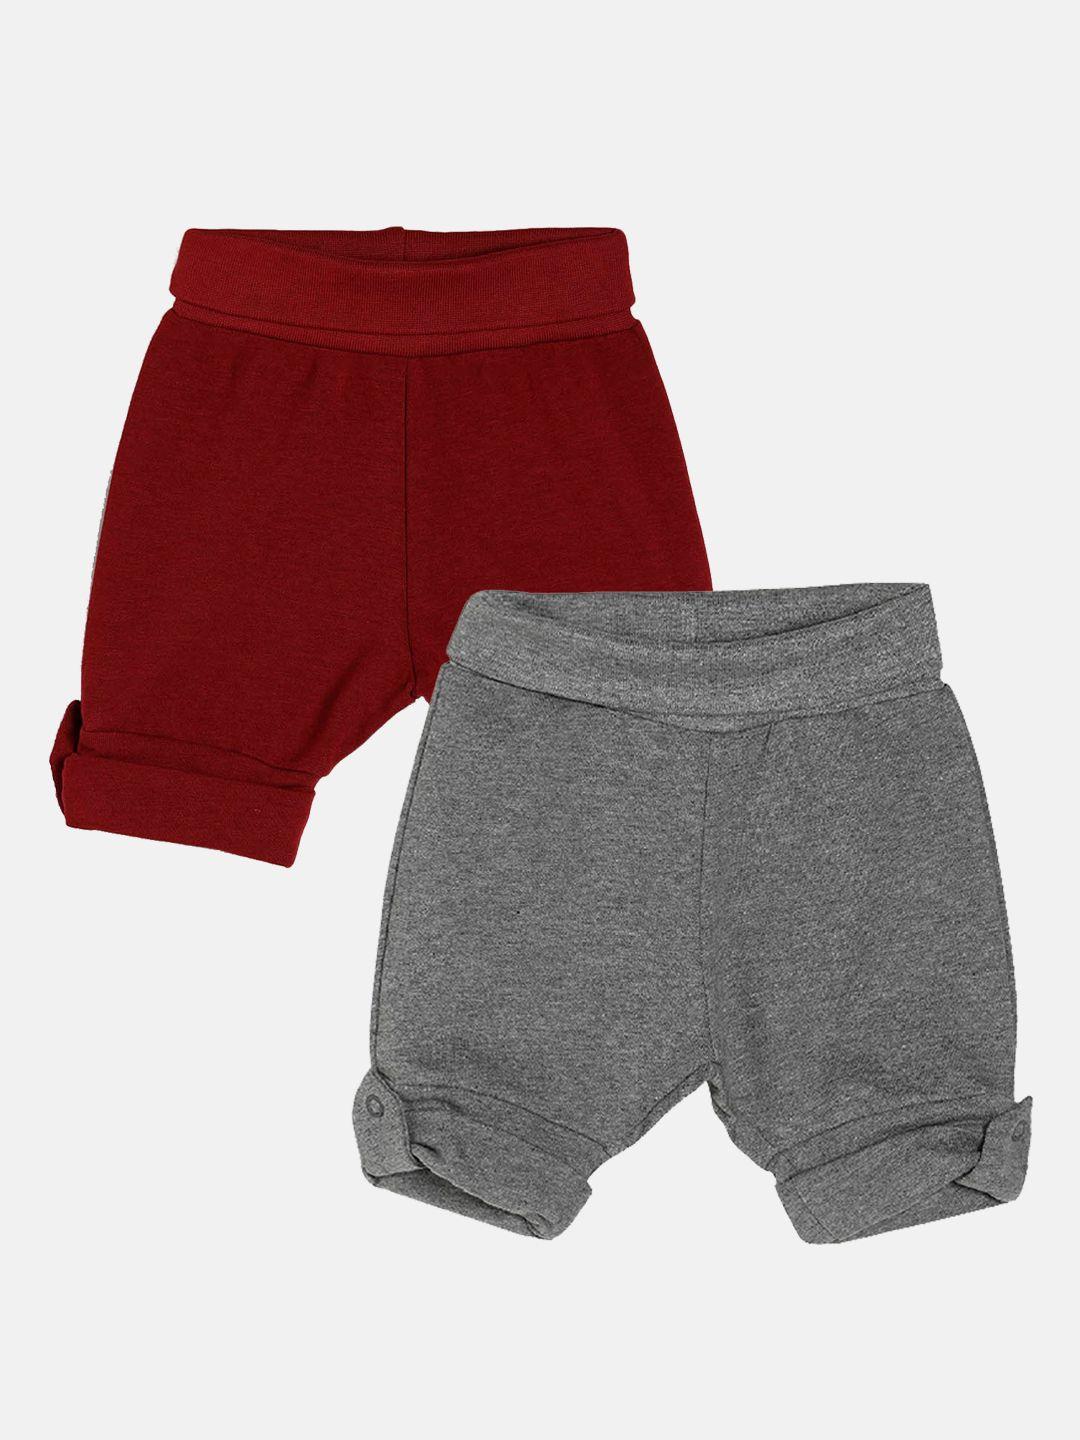 baesd kids pack of 2 mid-rise shorts